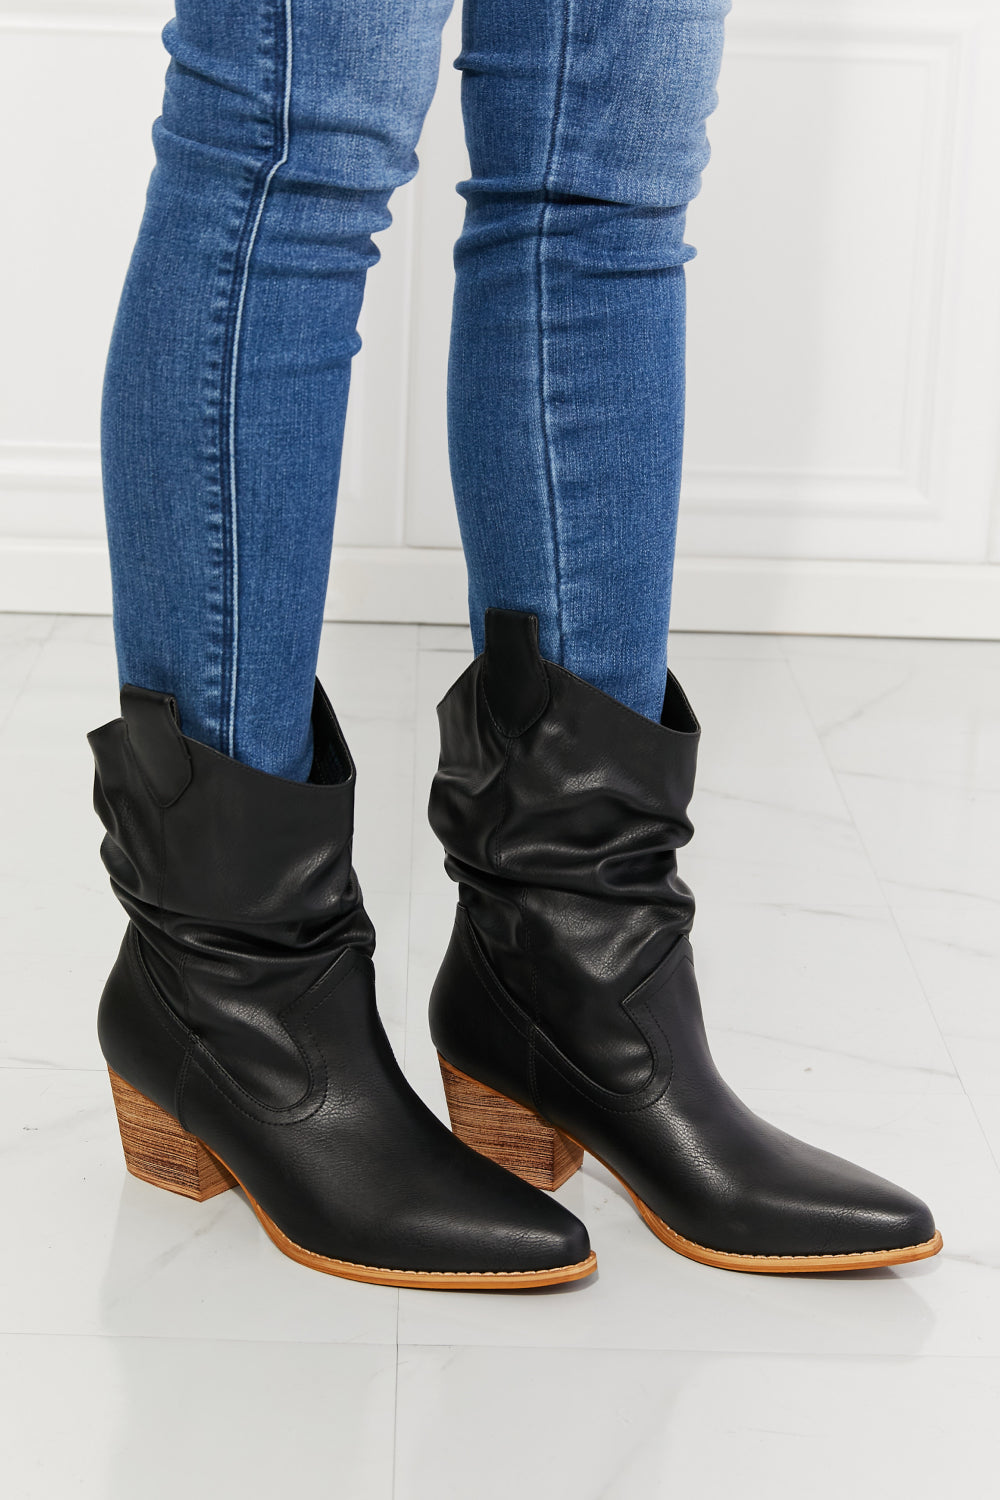 MMShoes Better in Texas Scrunch Cowboy Boots in Black MMShoes